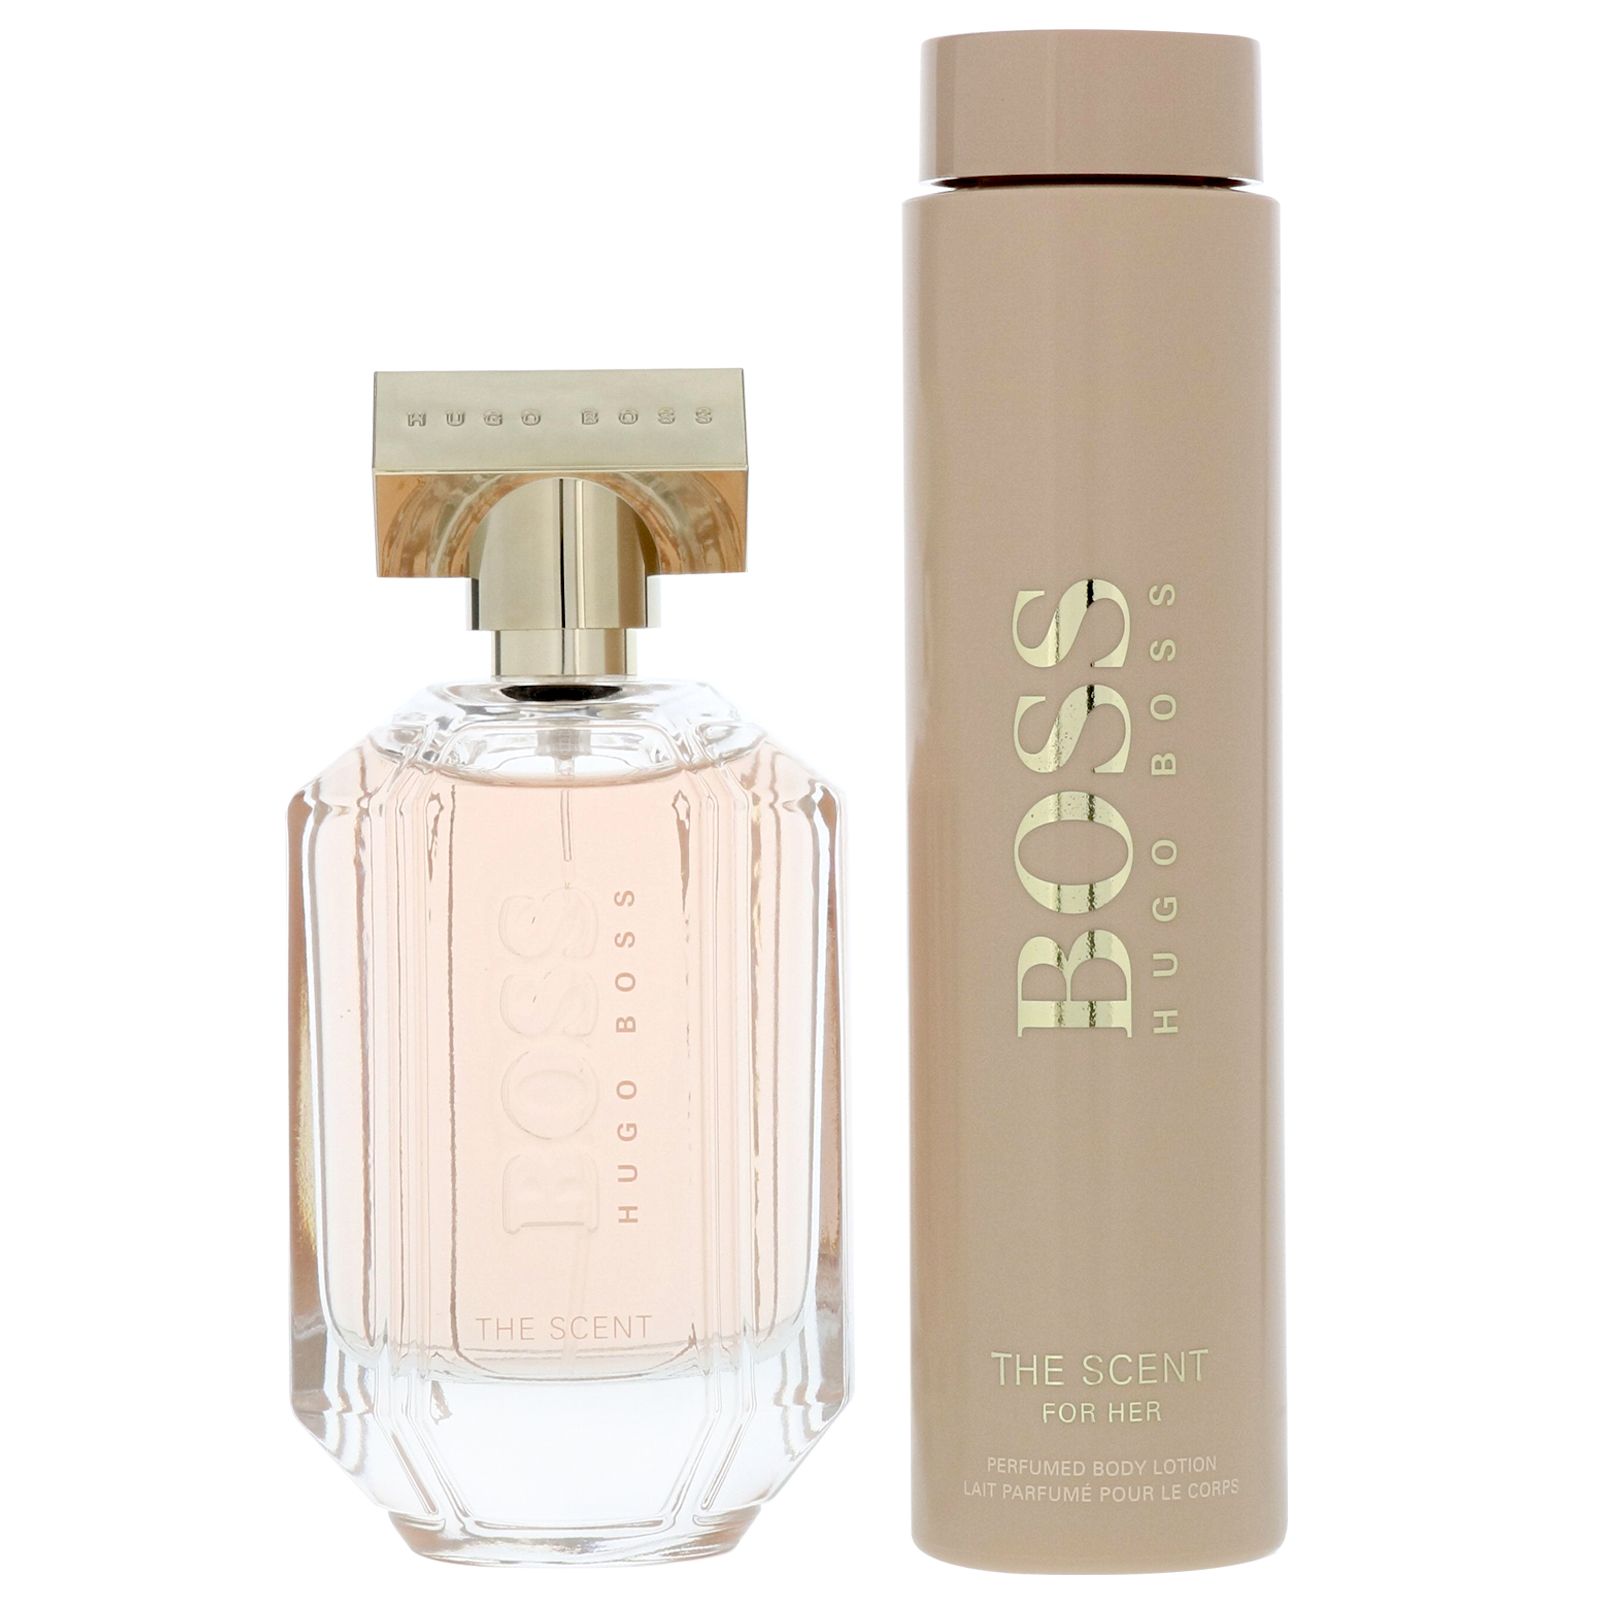 hugo boss the scent for her body lotion 200ml